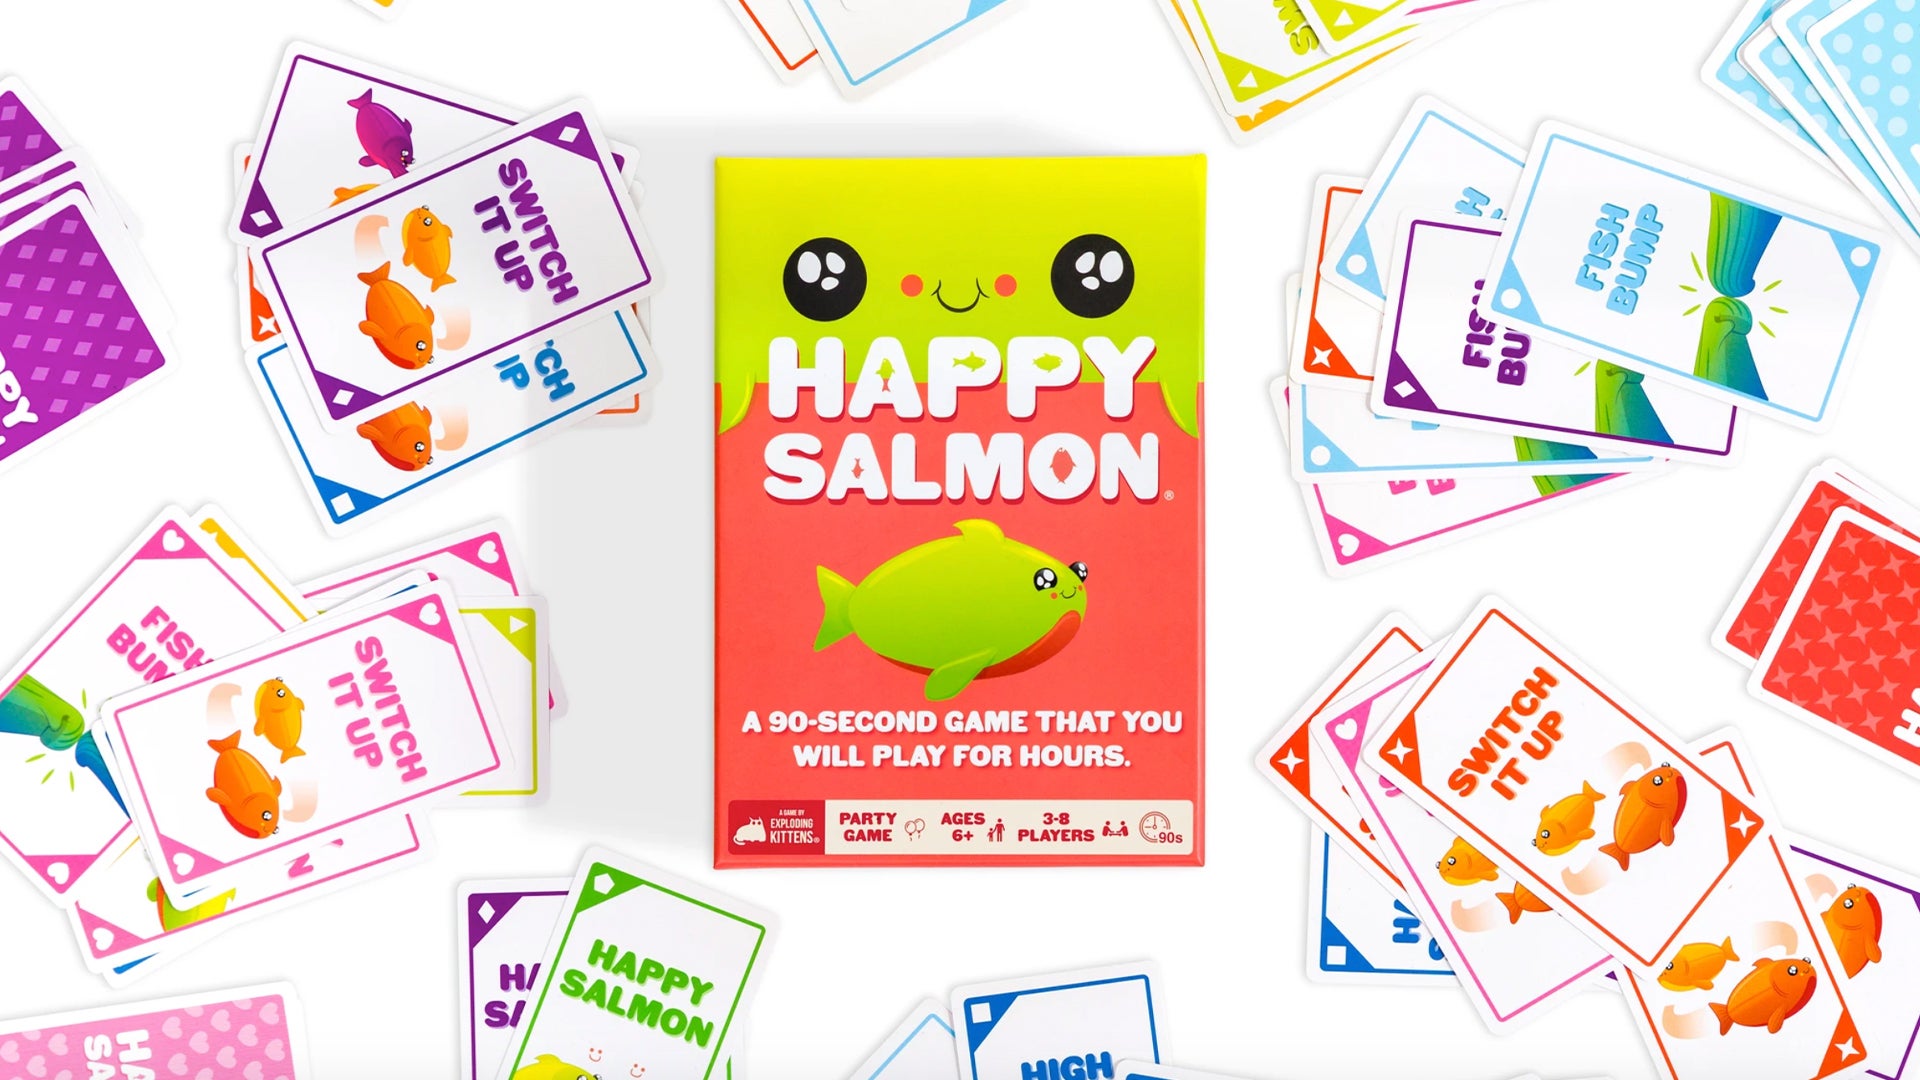 Image for Asmodee invests in Exploding Kittens to “more closely collaborate on game design”